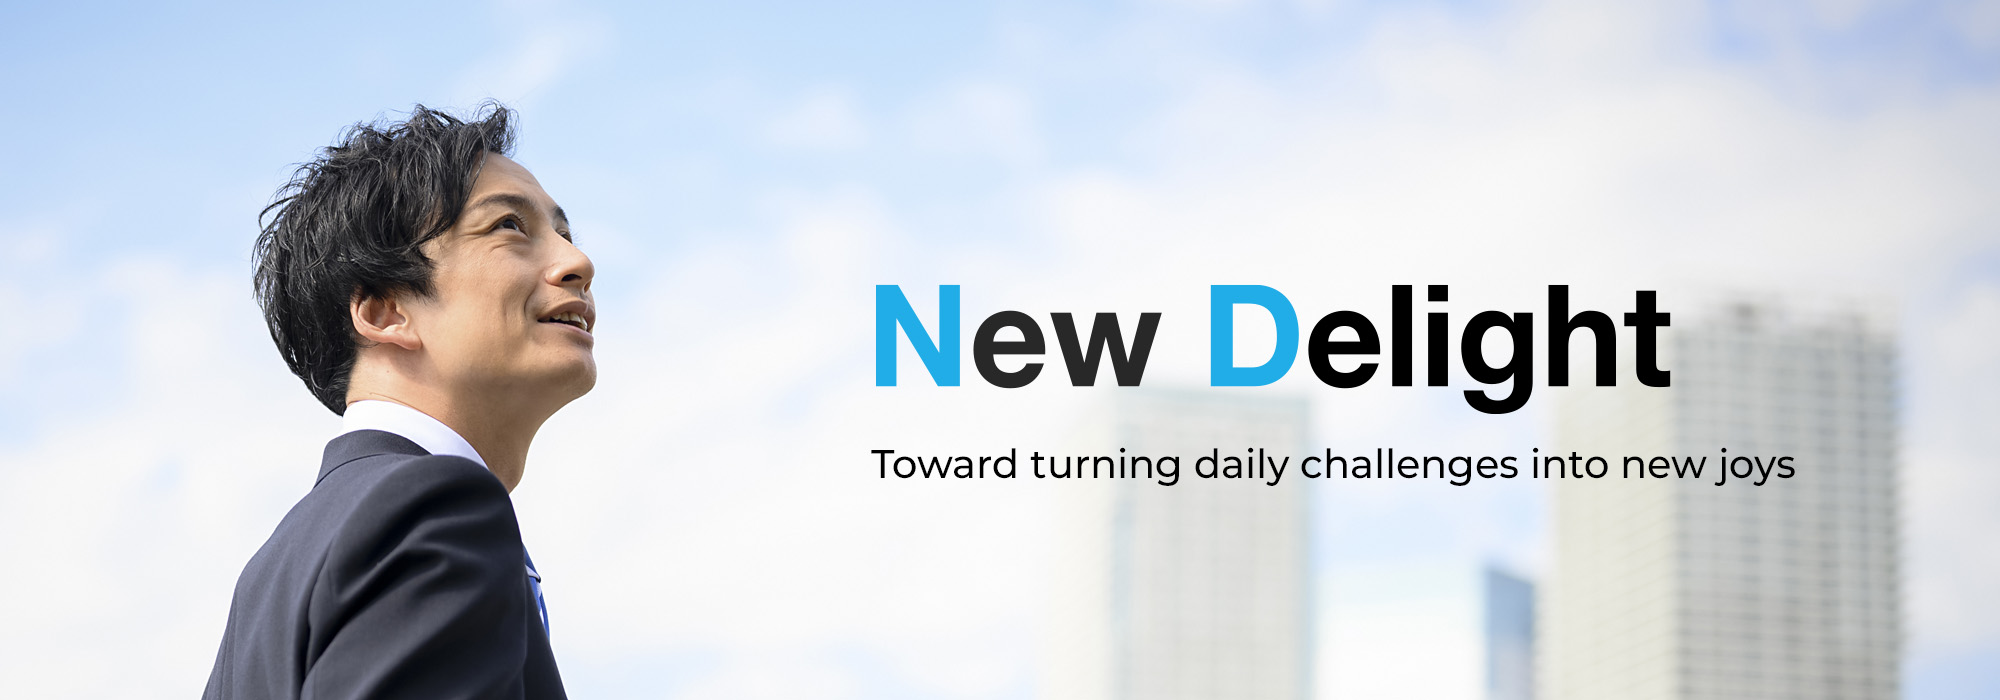 New Delight : Toward turning daily challenges into new joys